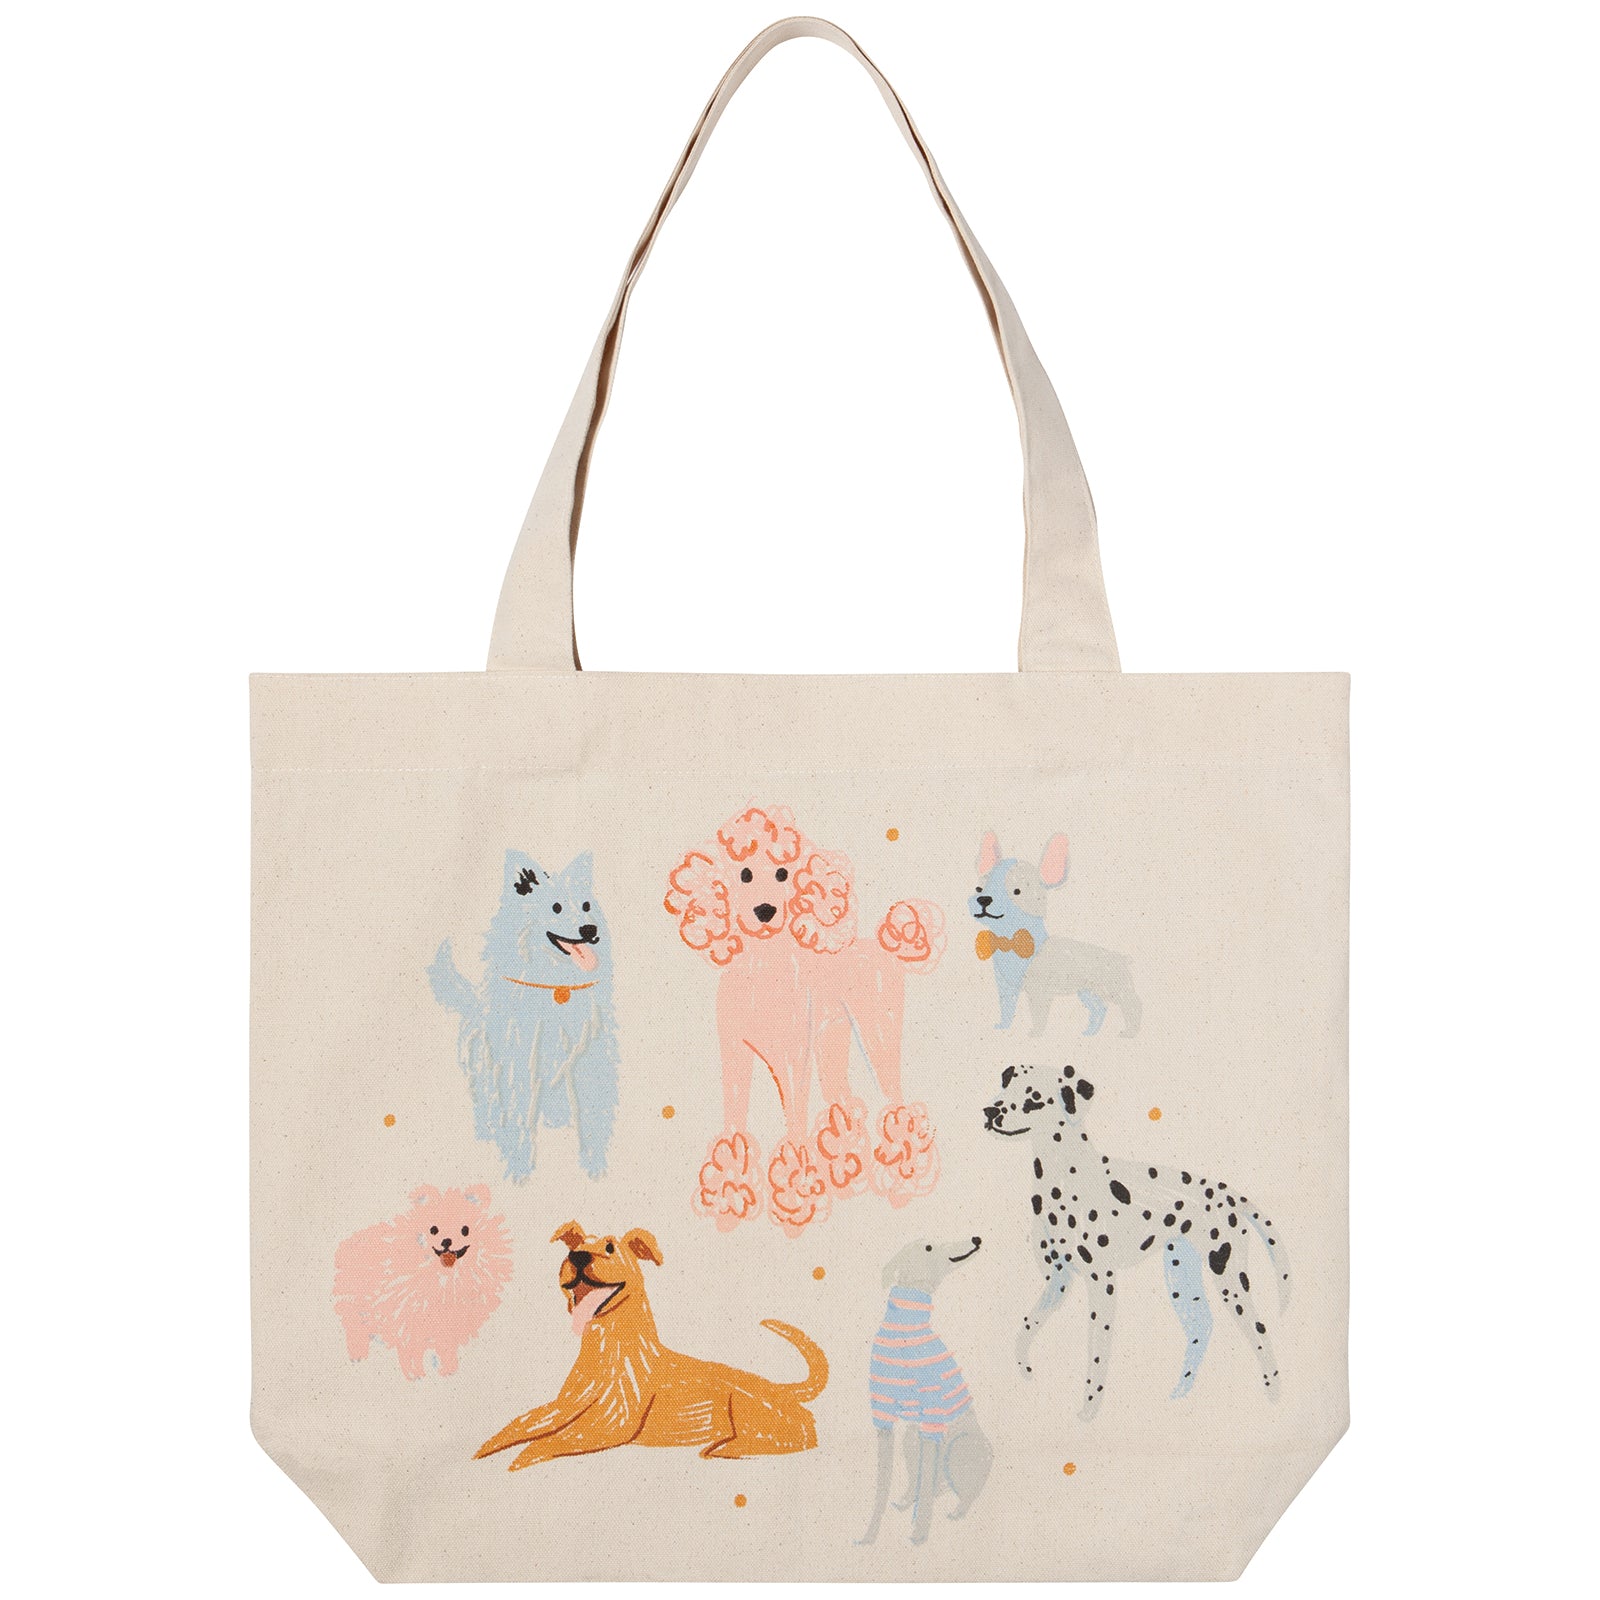 Puppos Puppies Tote Bag | Now Designs Danica - Oscar & Libby's